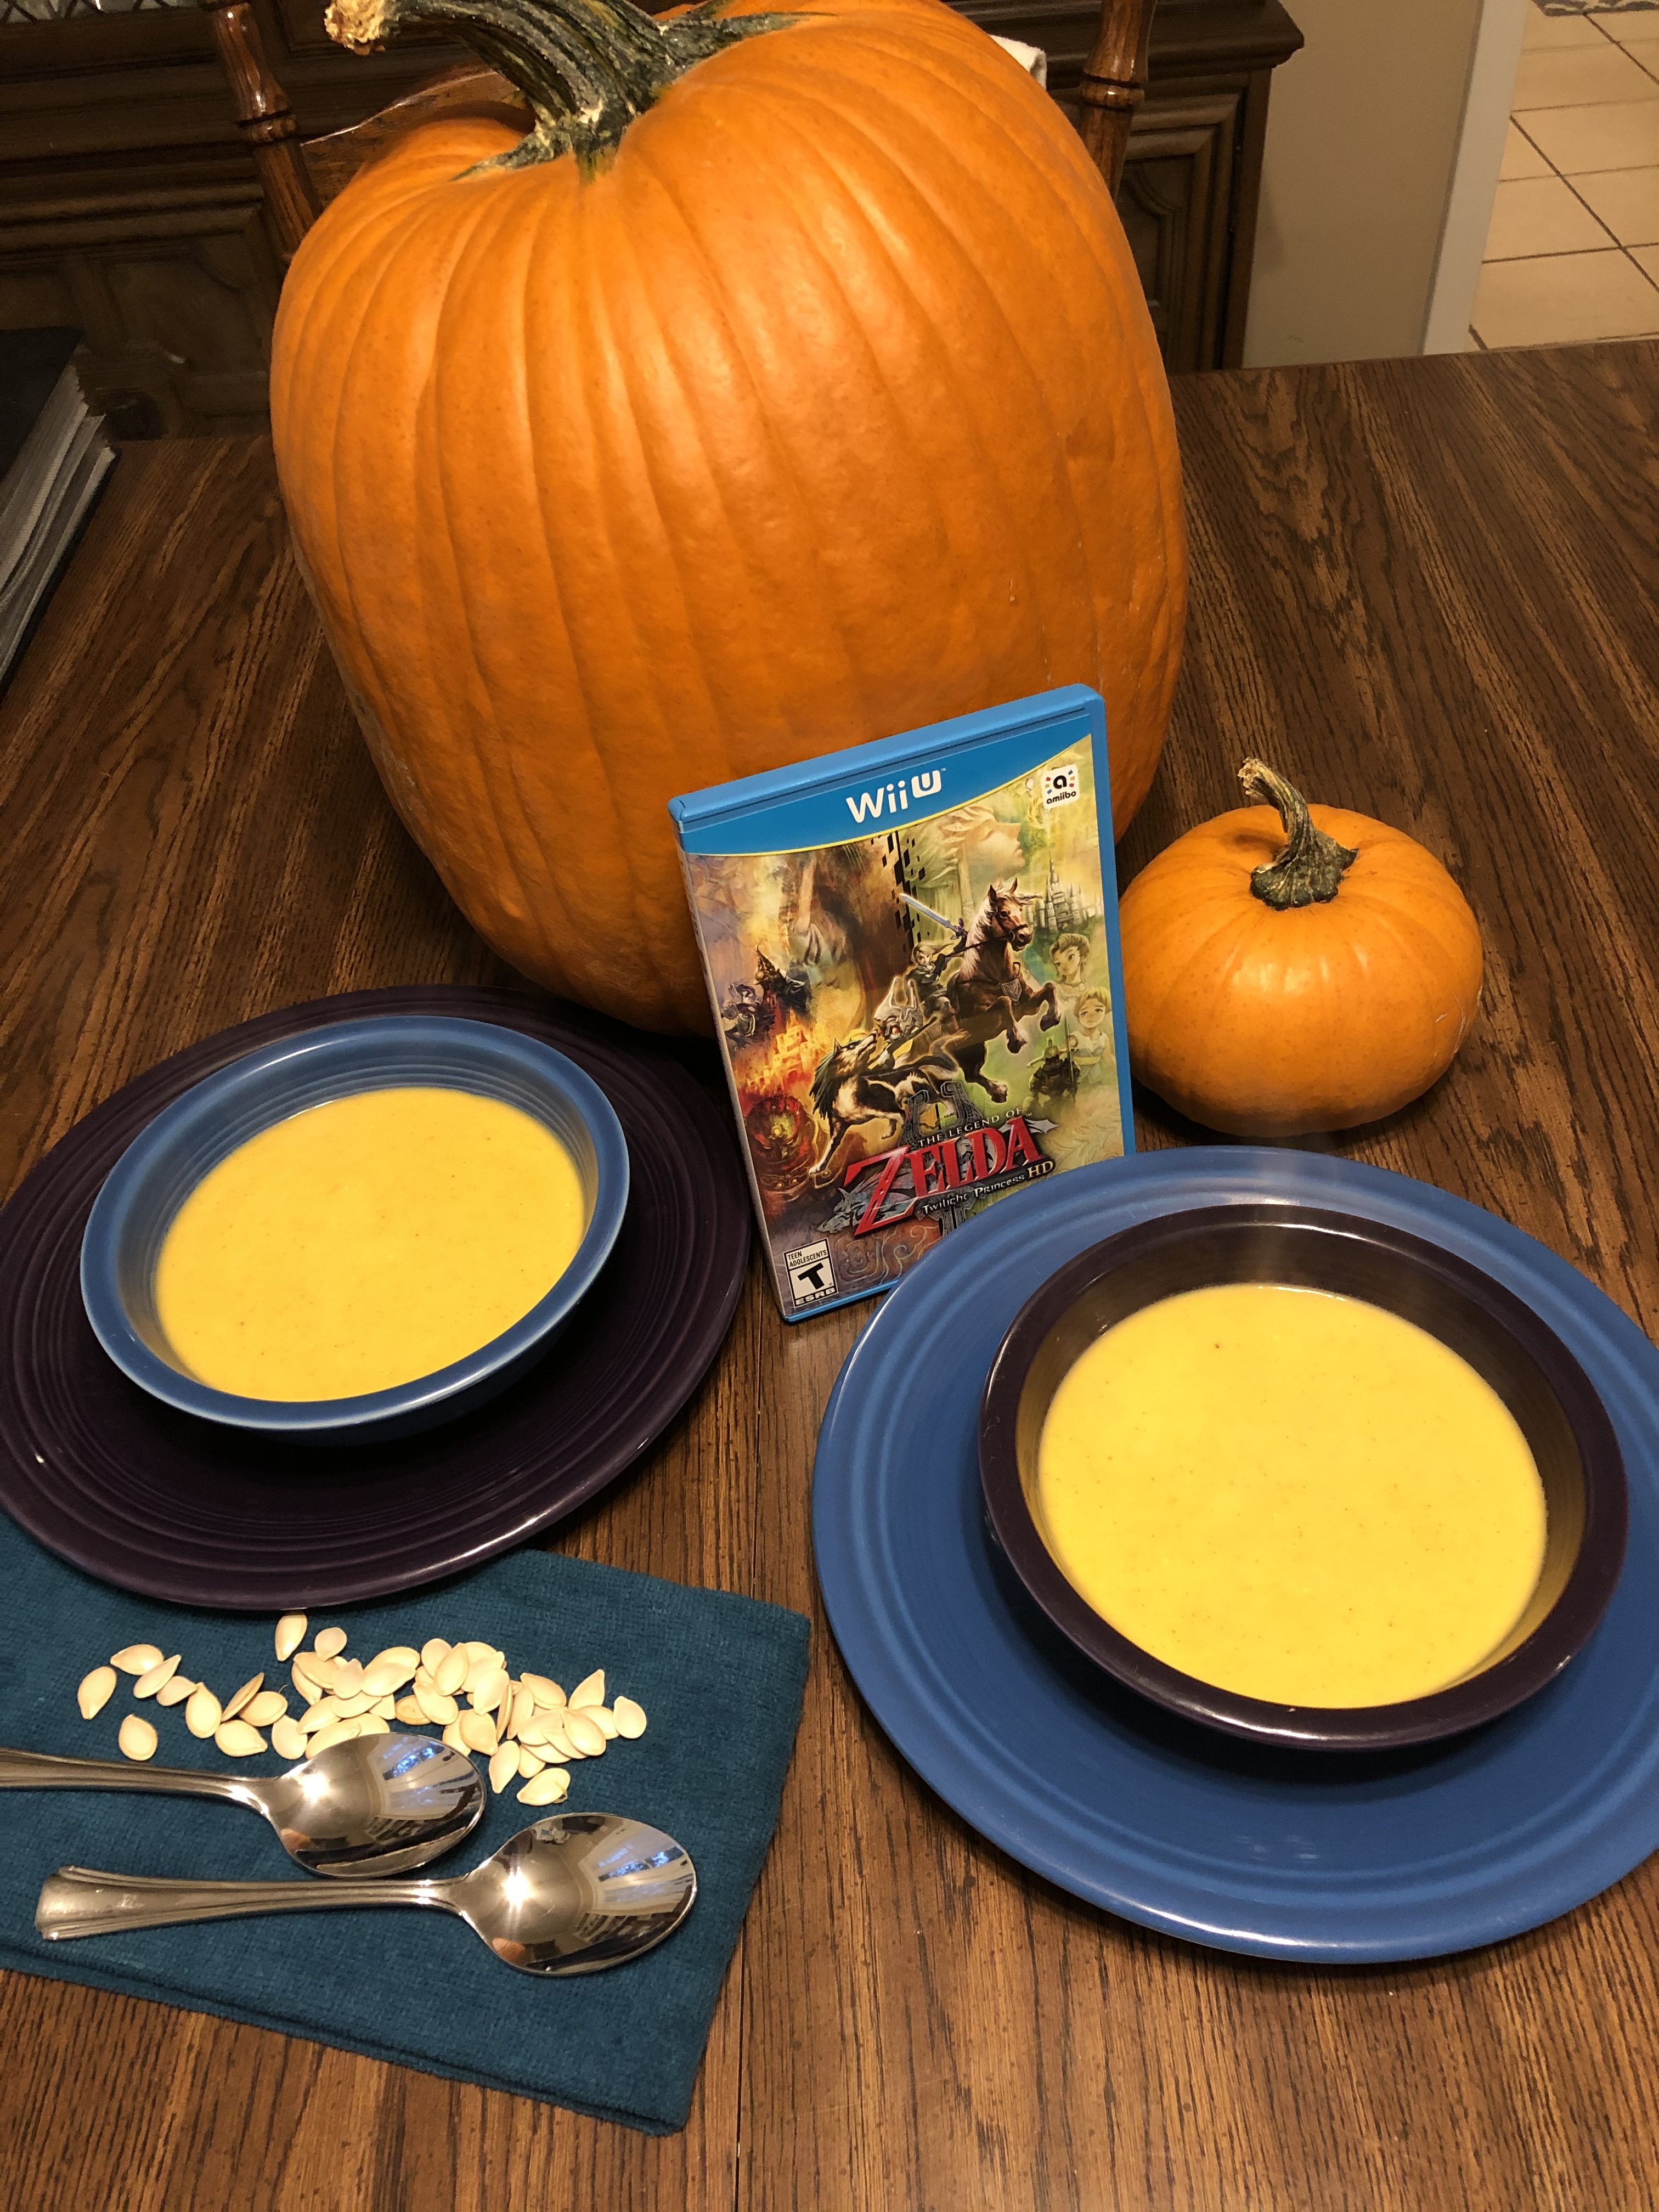 https://www.zeldadungeon.net/i-made-yetos-pumpkin-soup-from-twilight-princess-heres-how-it-tasted/img_3167/